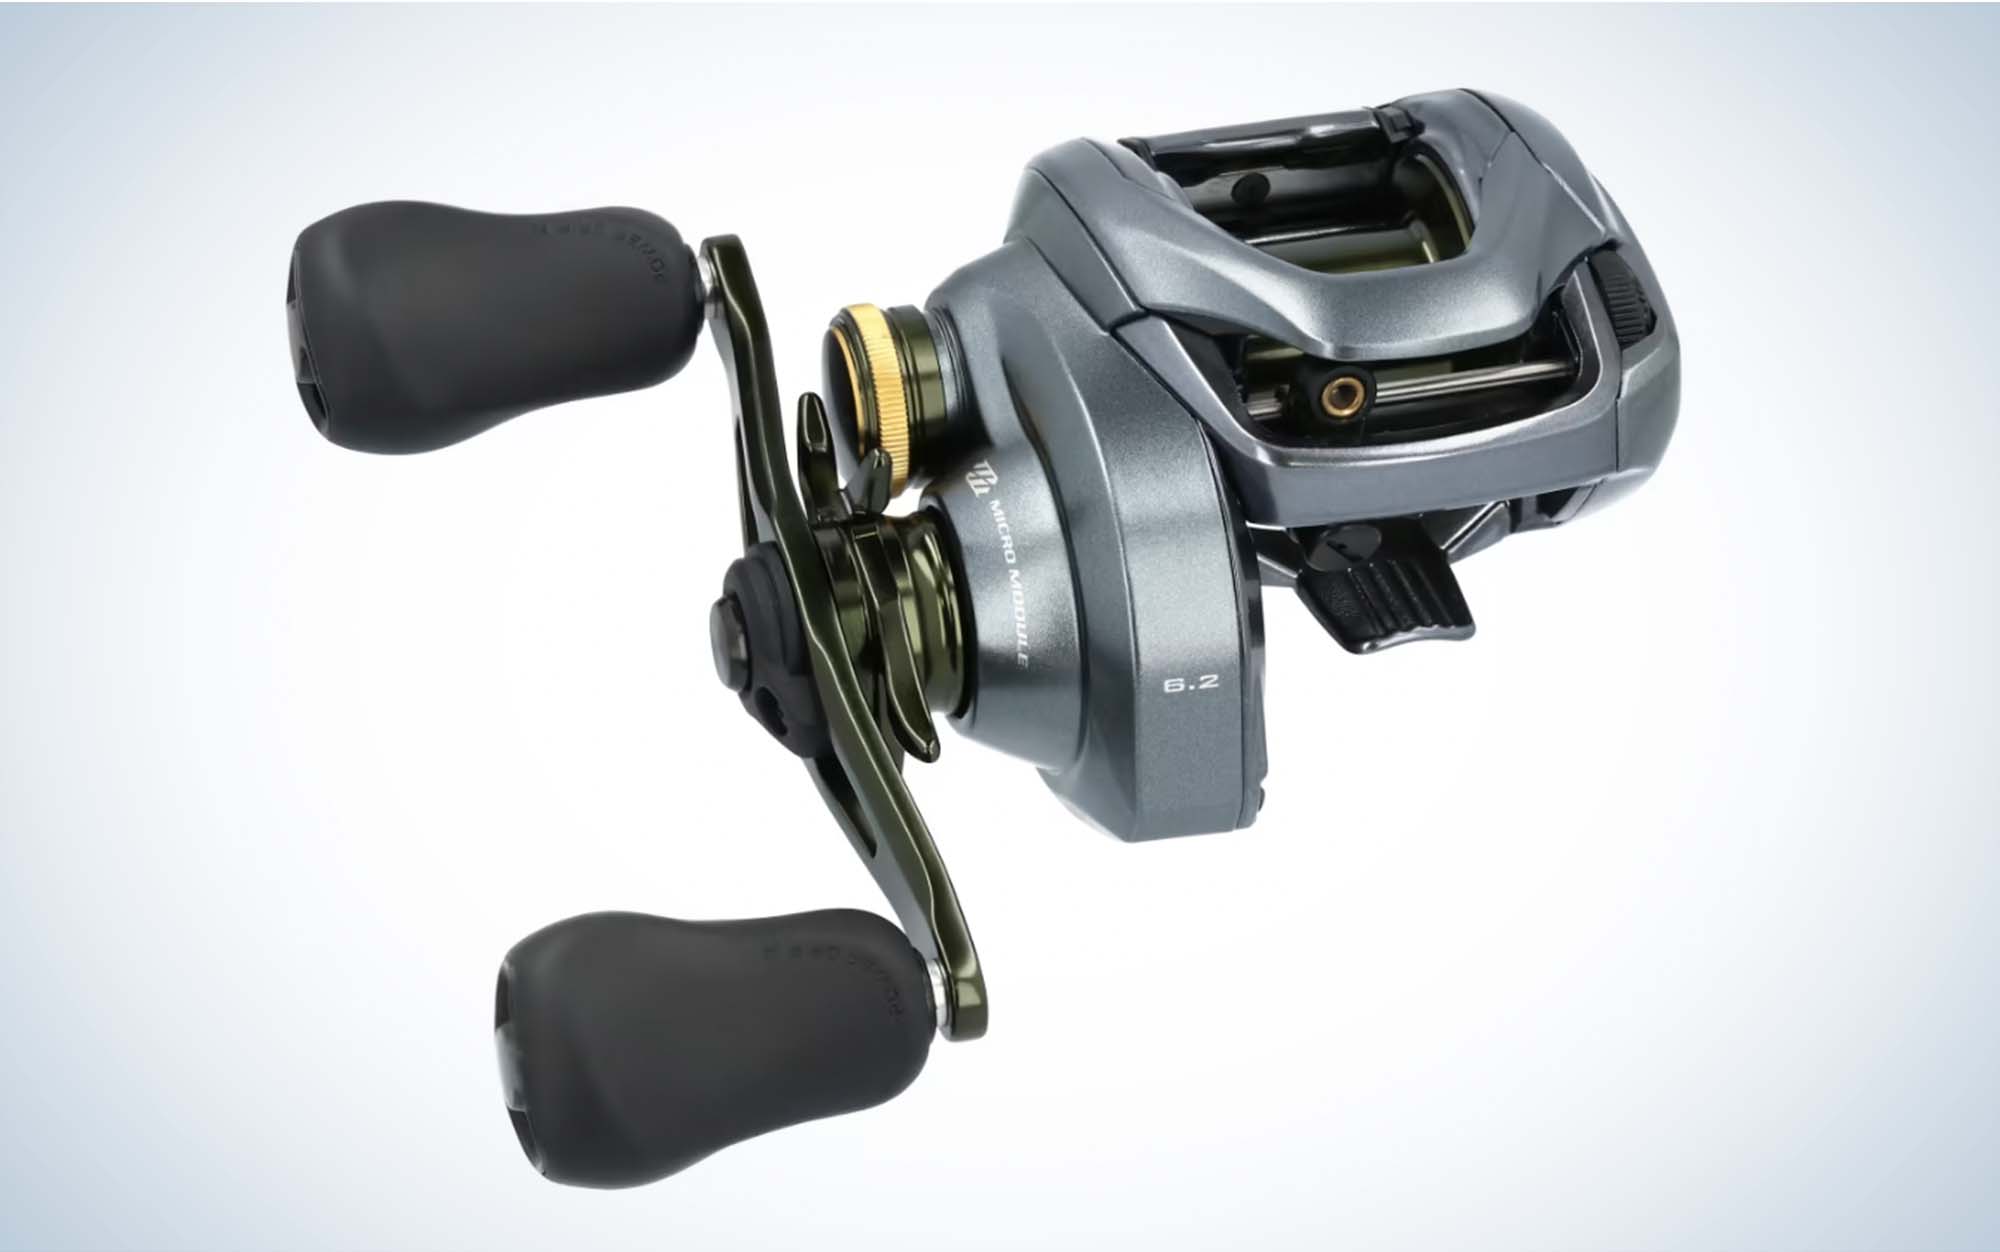 The curado dc is one of the best baitcasting reels